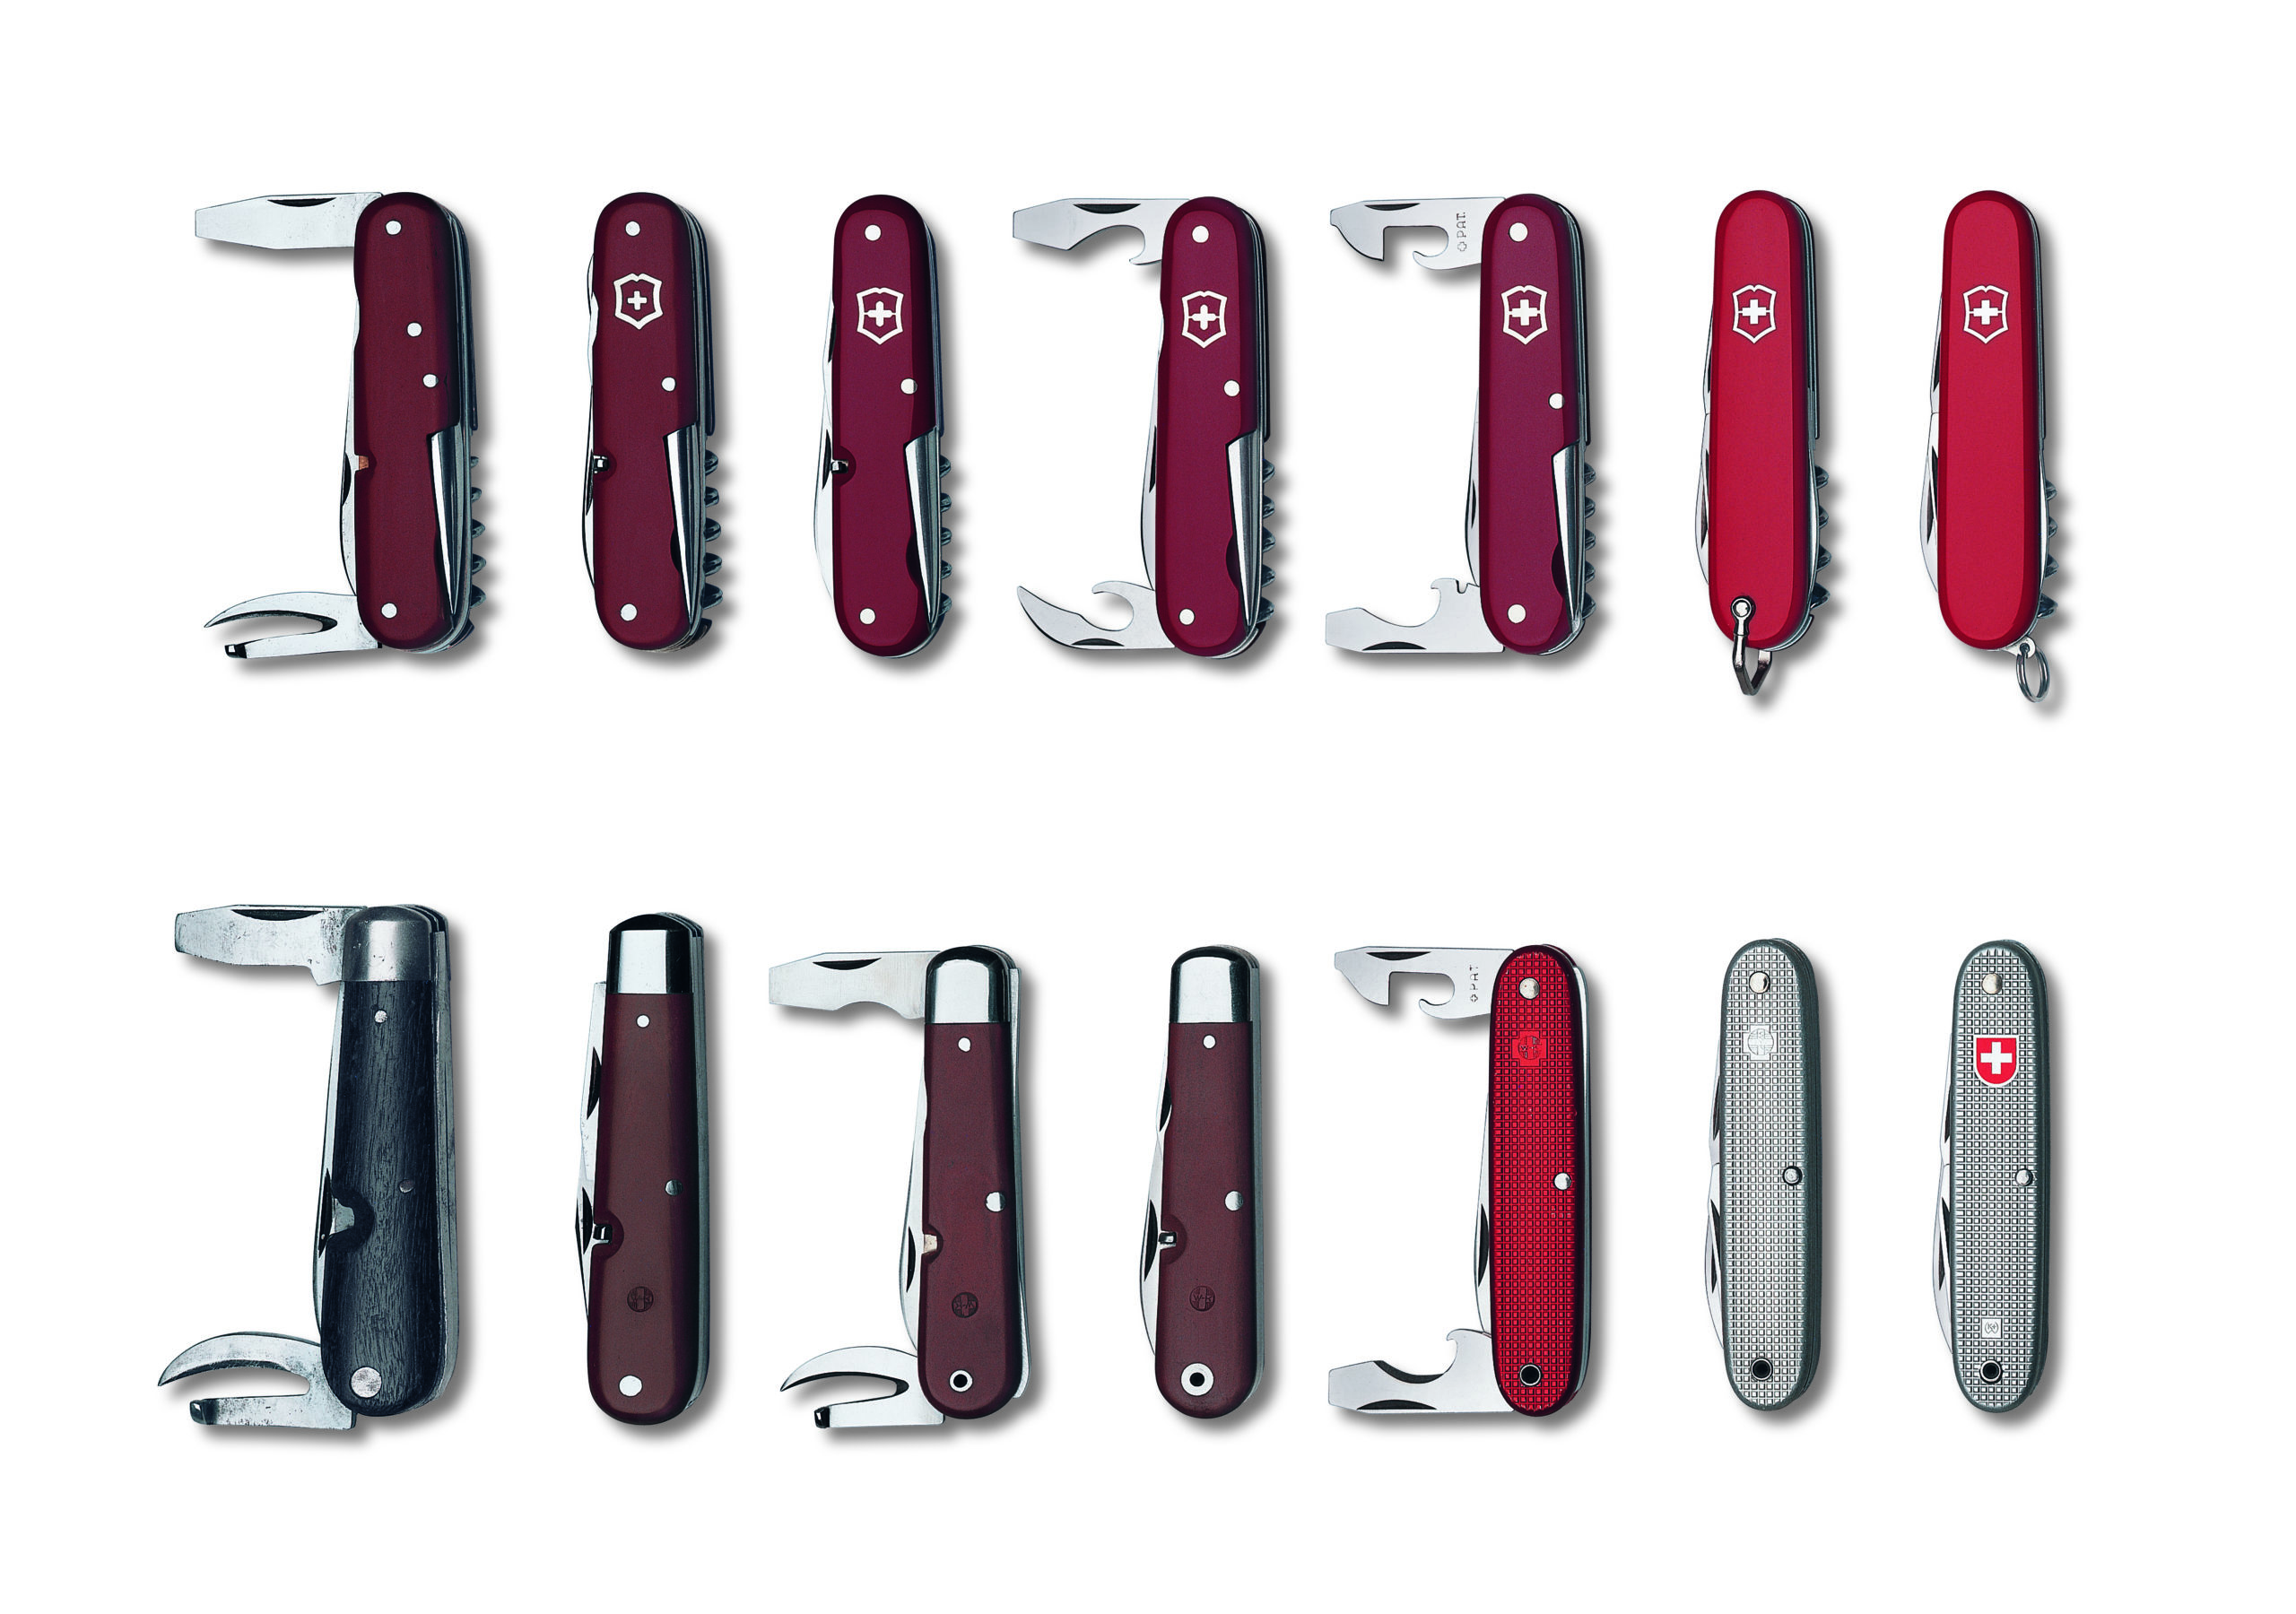 History of the Swiss Army Knife